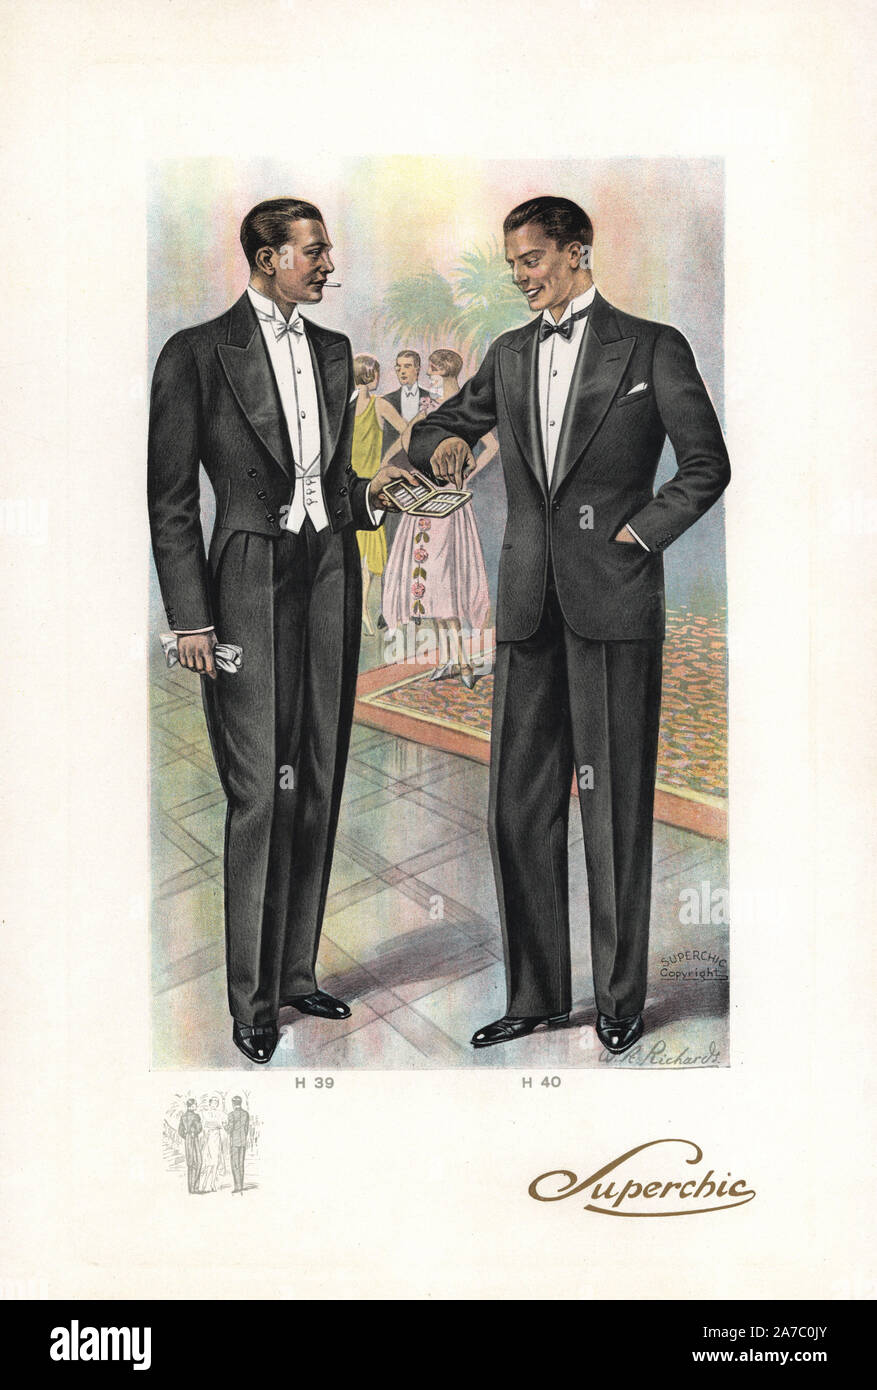 Men in smoking and formal wear at a chic party from the 1920s. Man in smoking suit with wide lapels offering a cigarette to another man in formal wear with black bow tie. Color printed fashion plate by W. A. Richards from the winter catalogue of Superchic, London, 1929. Stock Photo